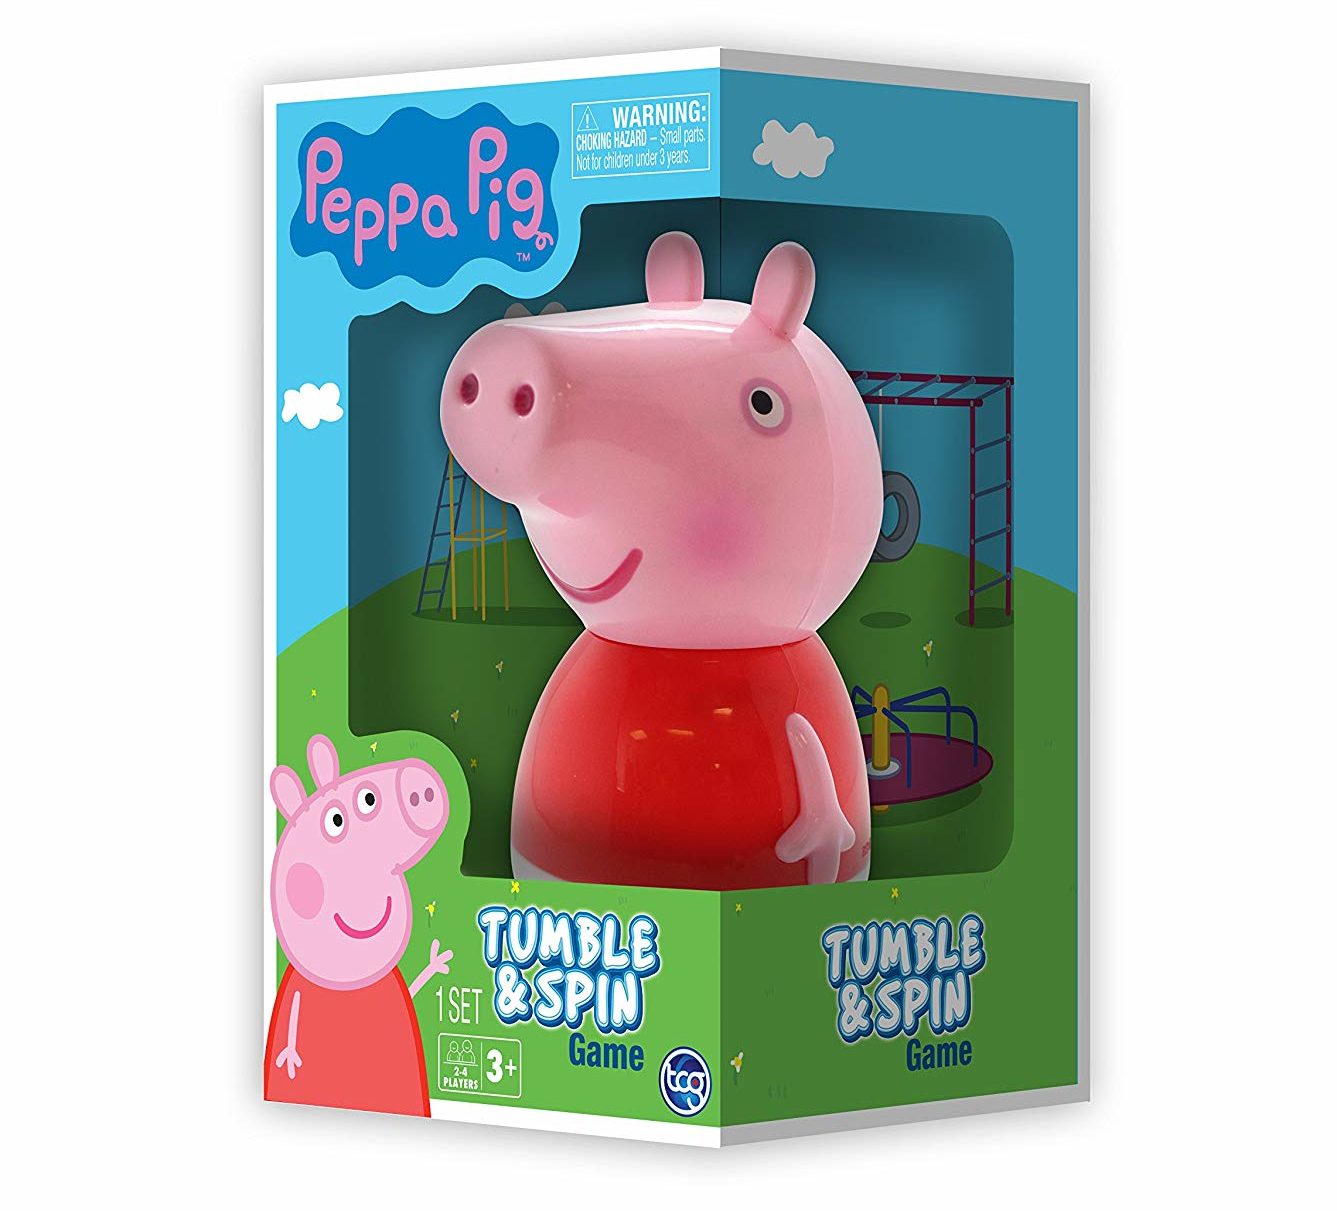 New Peppa Pig Toys & Gifts 2022: Tumble and Spin Game 2022